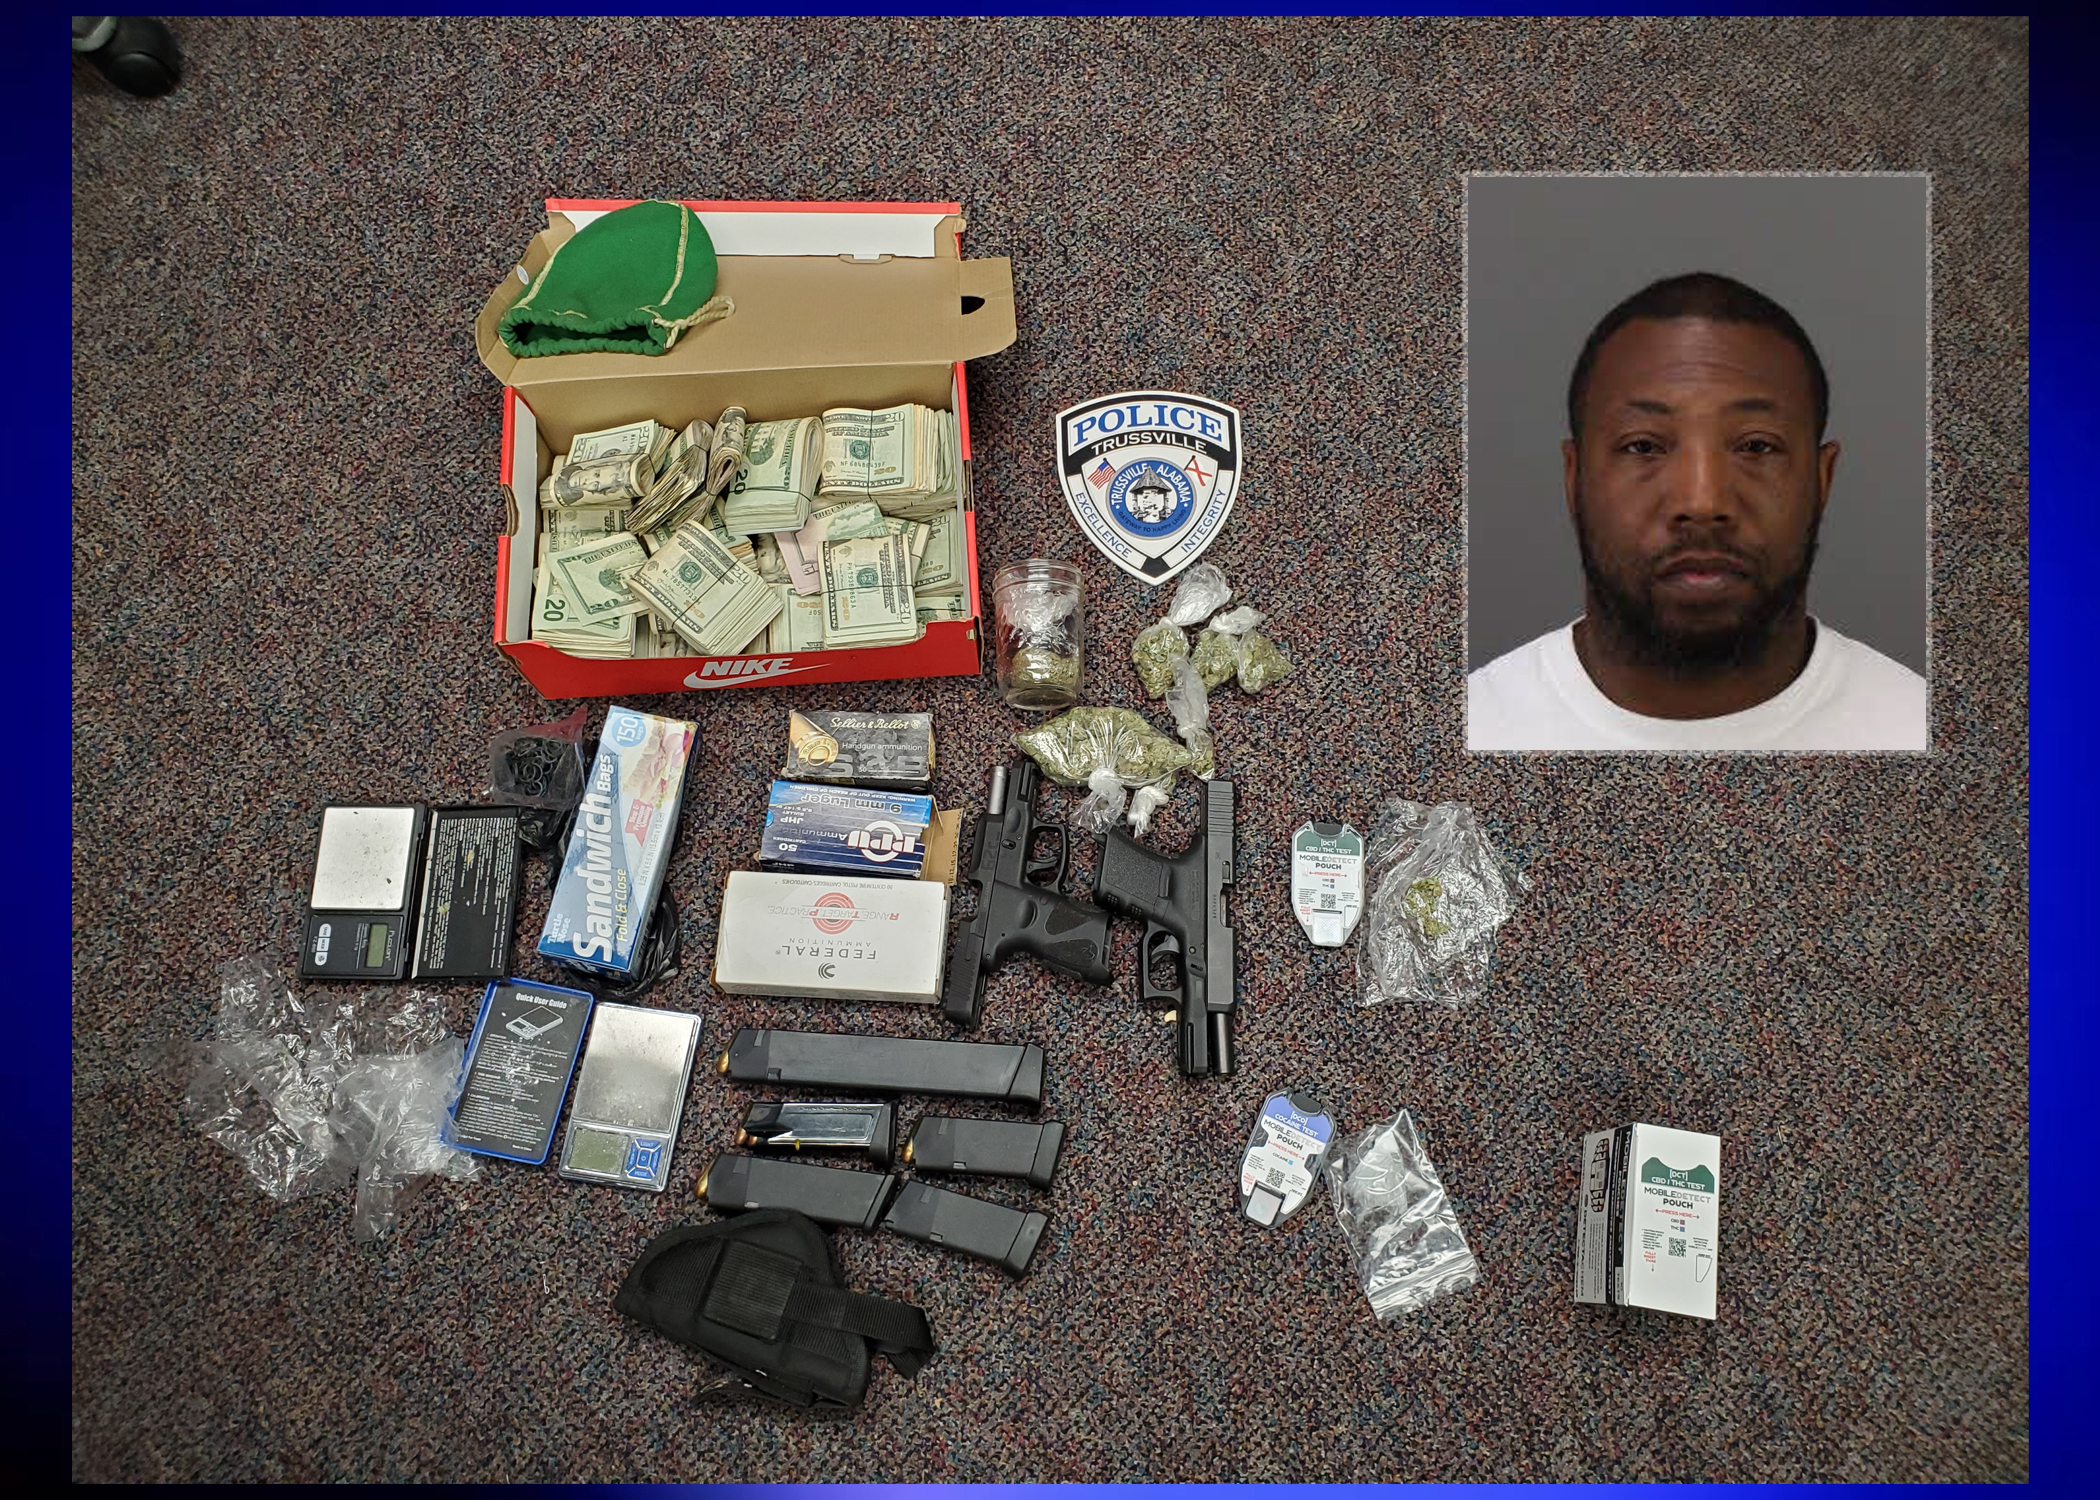 Drugs, guns and money seized from home during search by Trussville PD